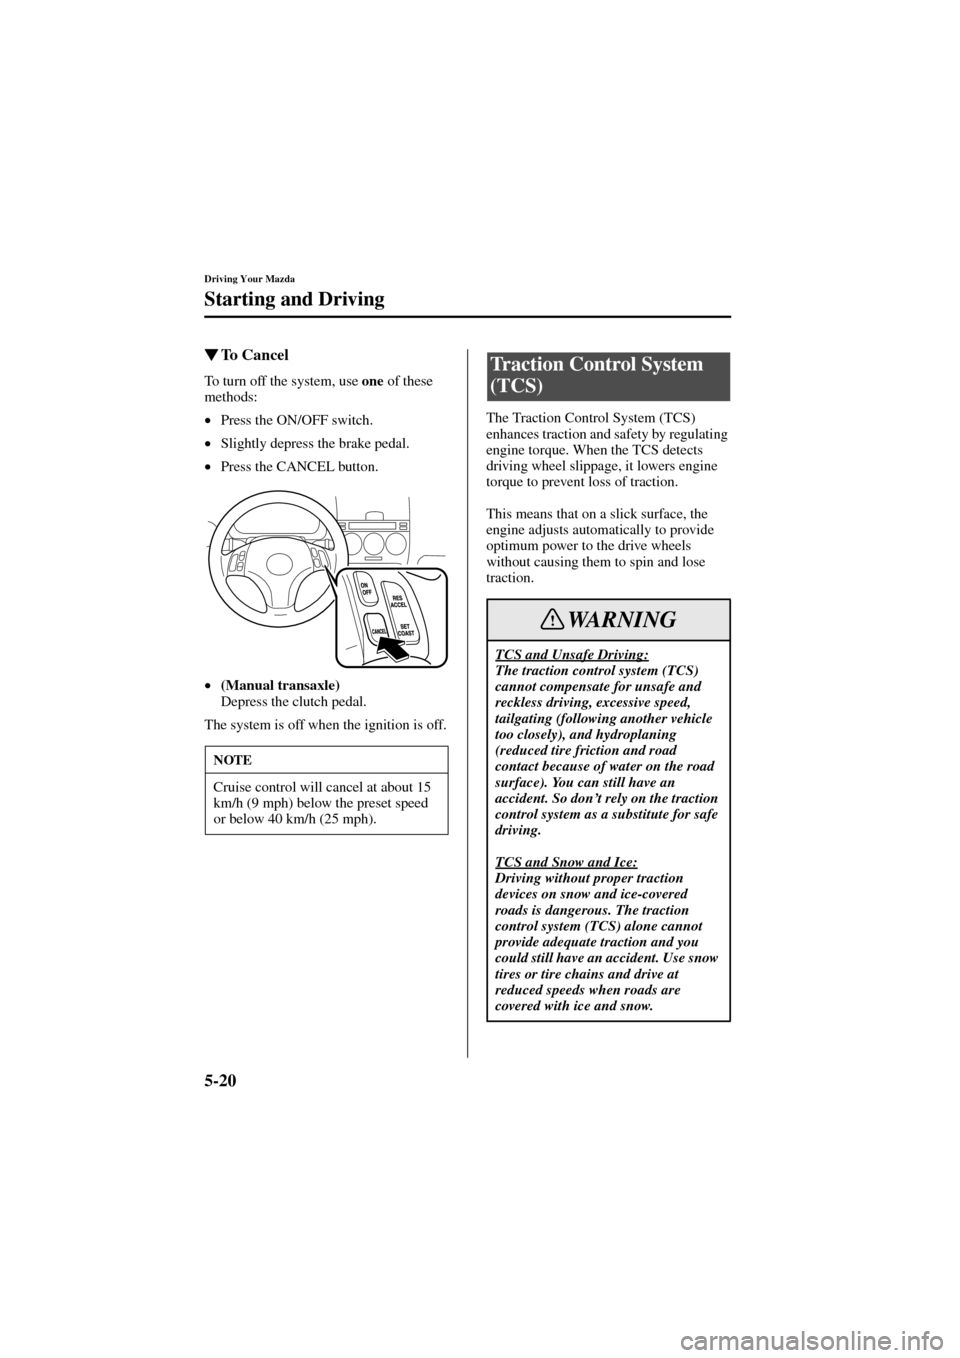 MAZDA MODEL 6 2004   (in English) Owners Manual 5-20
Driving Your Mazda
Starting and Driving
Form No. 8R29-EA-02I
To  C a n c e l
To turn off the system, use one
 of these 
methods:
•
Press the ON/OFF switch.
•
Slightly depress the brake pedal